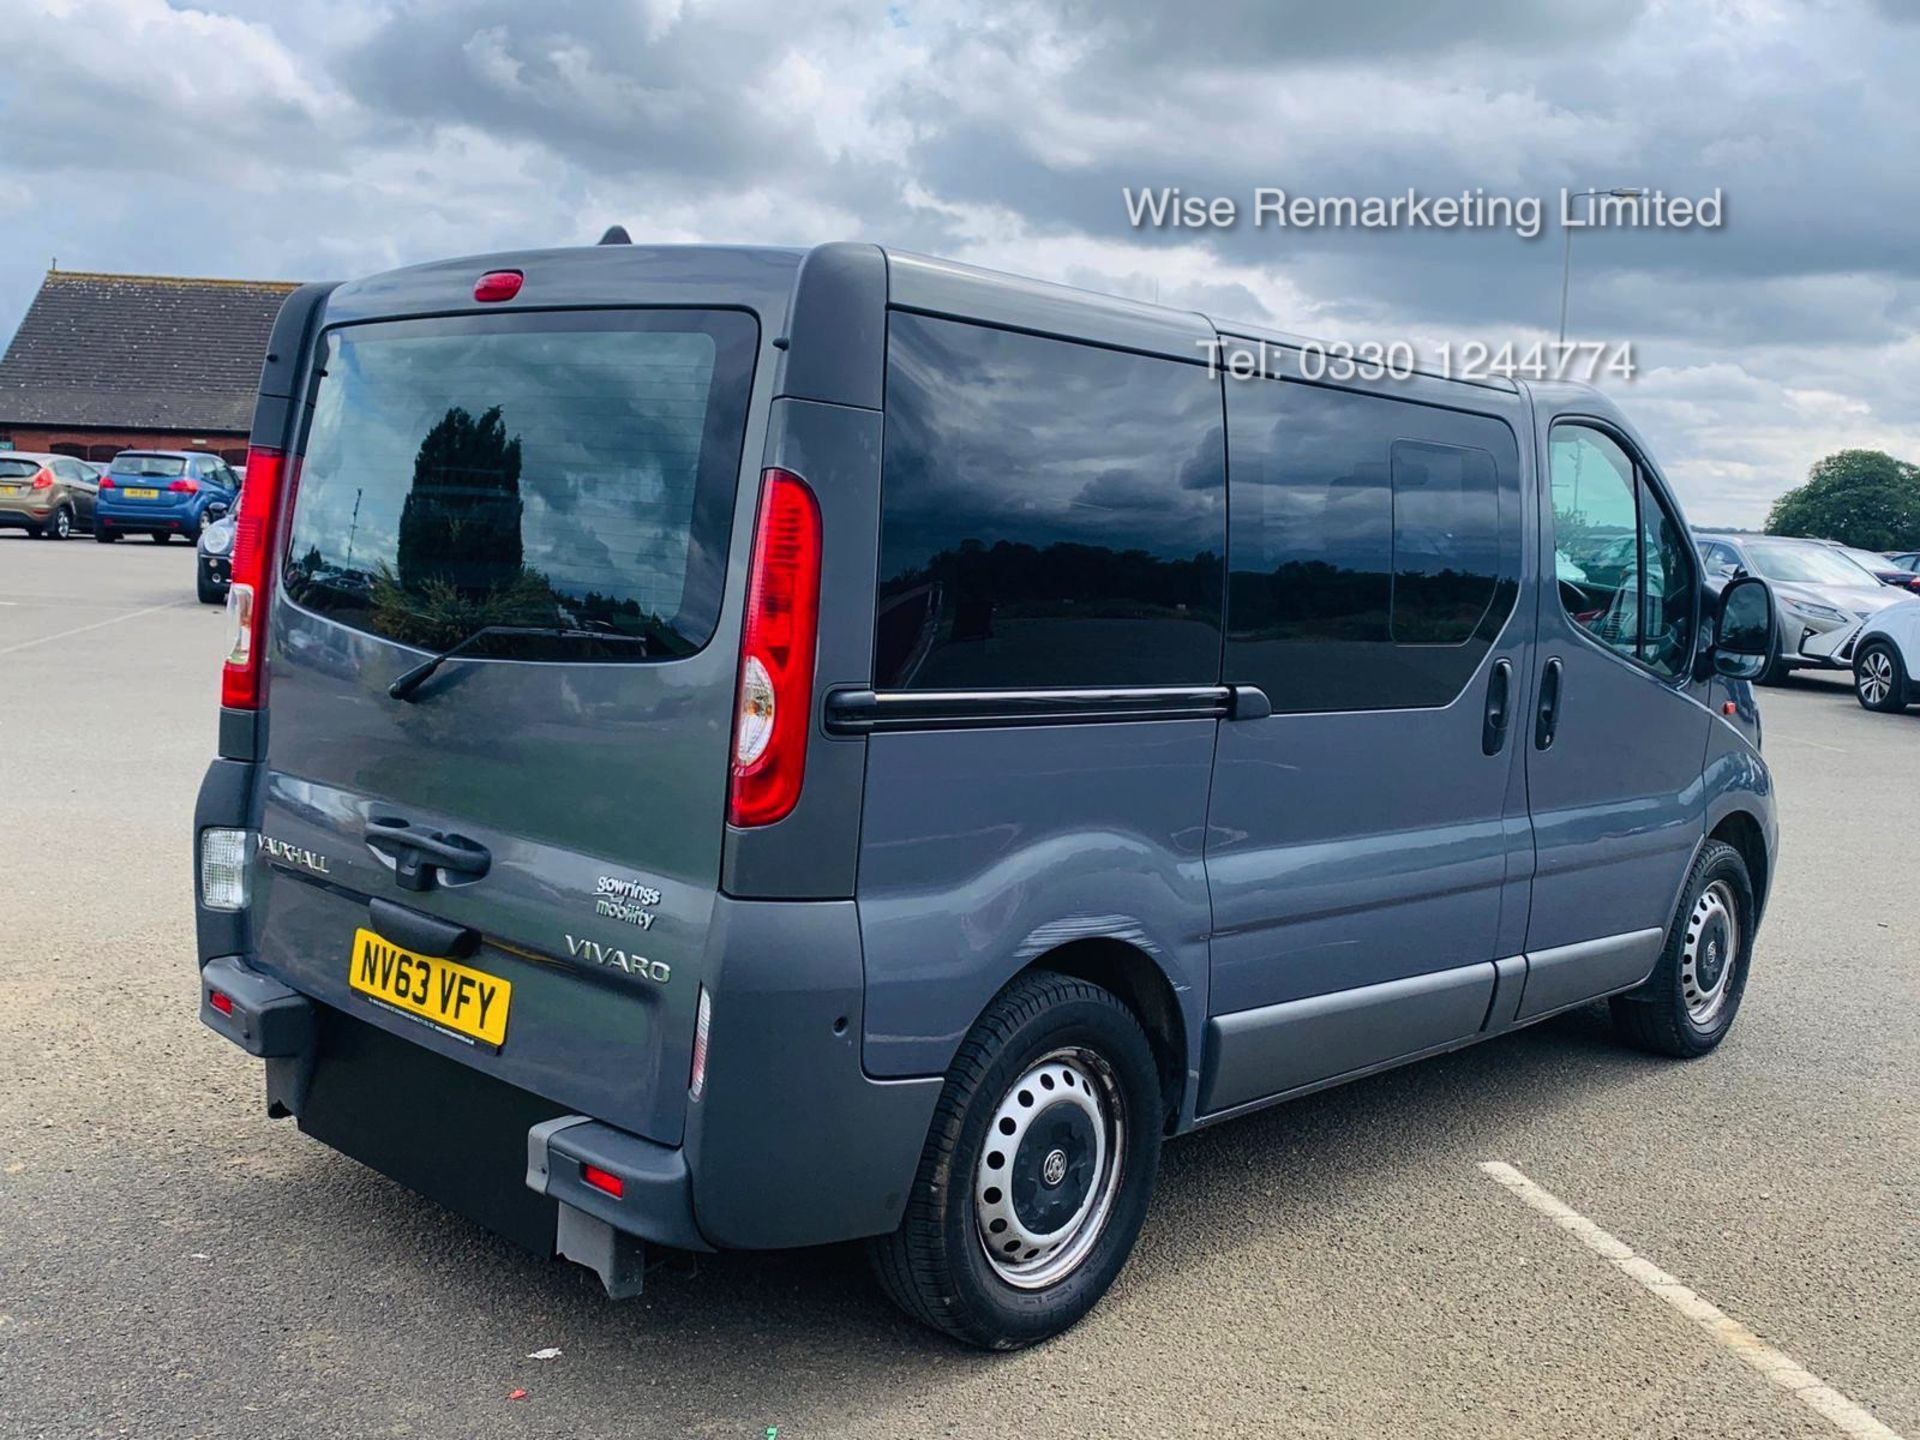 Vauxhall Vivaro 2.0 CDTI 2900 Minibus - 2014 Model - Wheel Chair Access - 1 Owner From New -History - Image 18 of 21